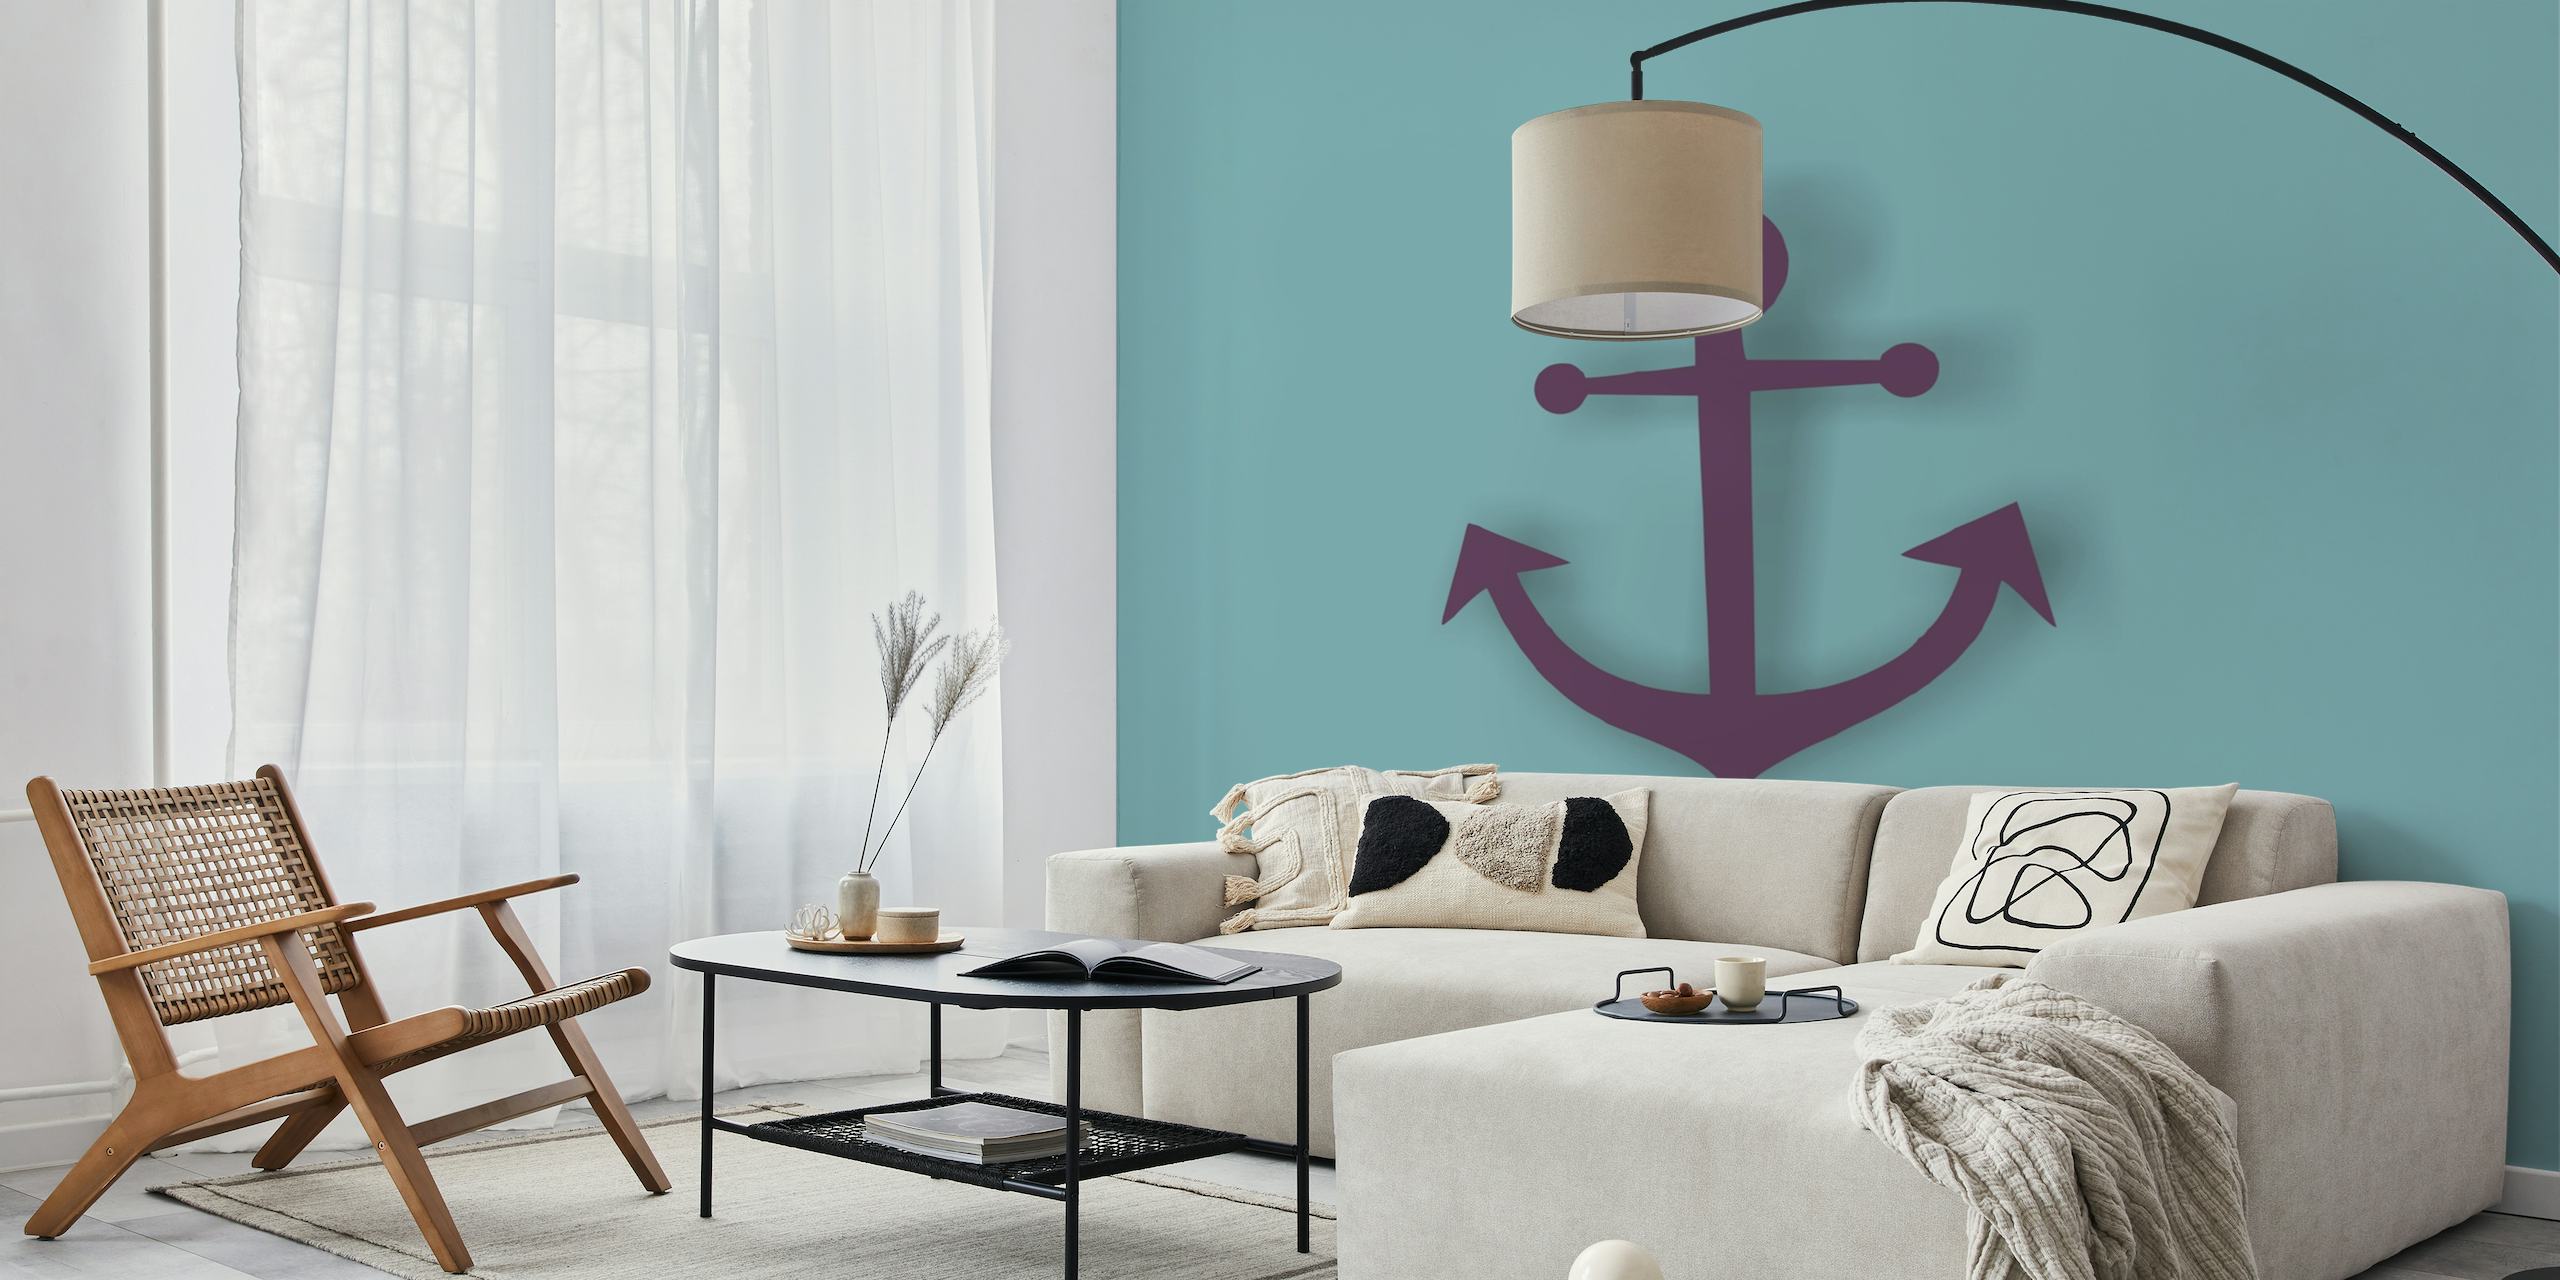 Mint green solid color anchor behang